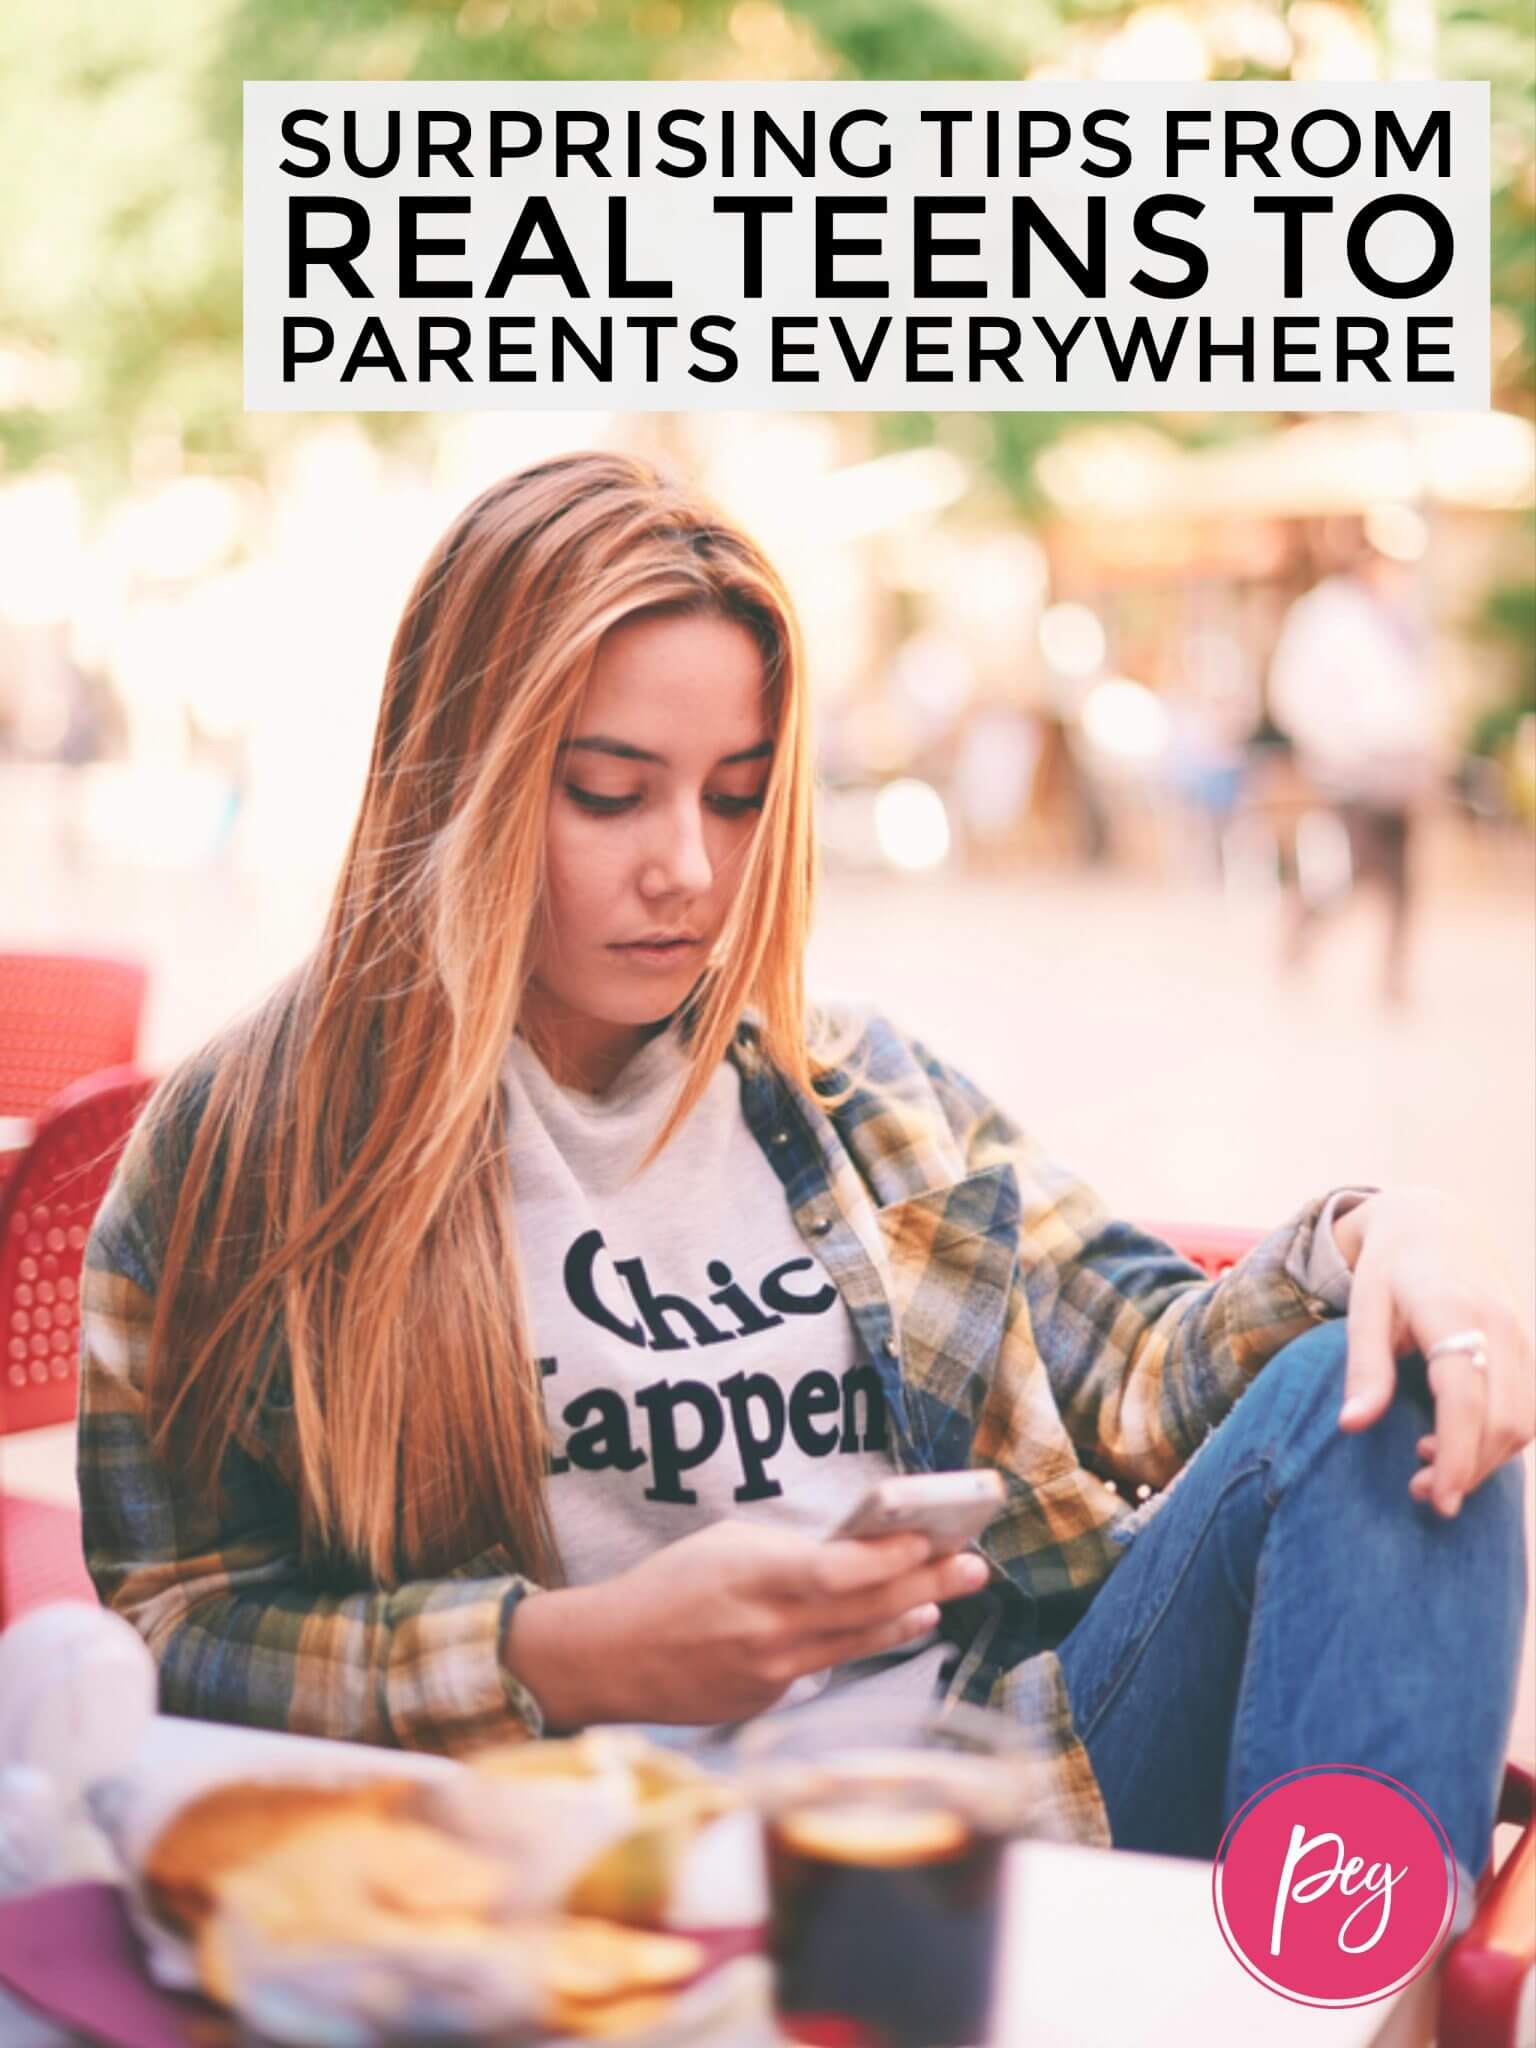 Surprising Tips from Real Teens to Parents Everywhere